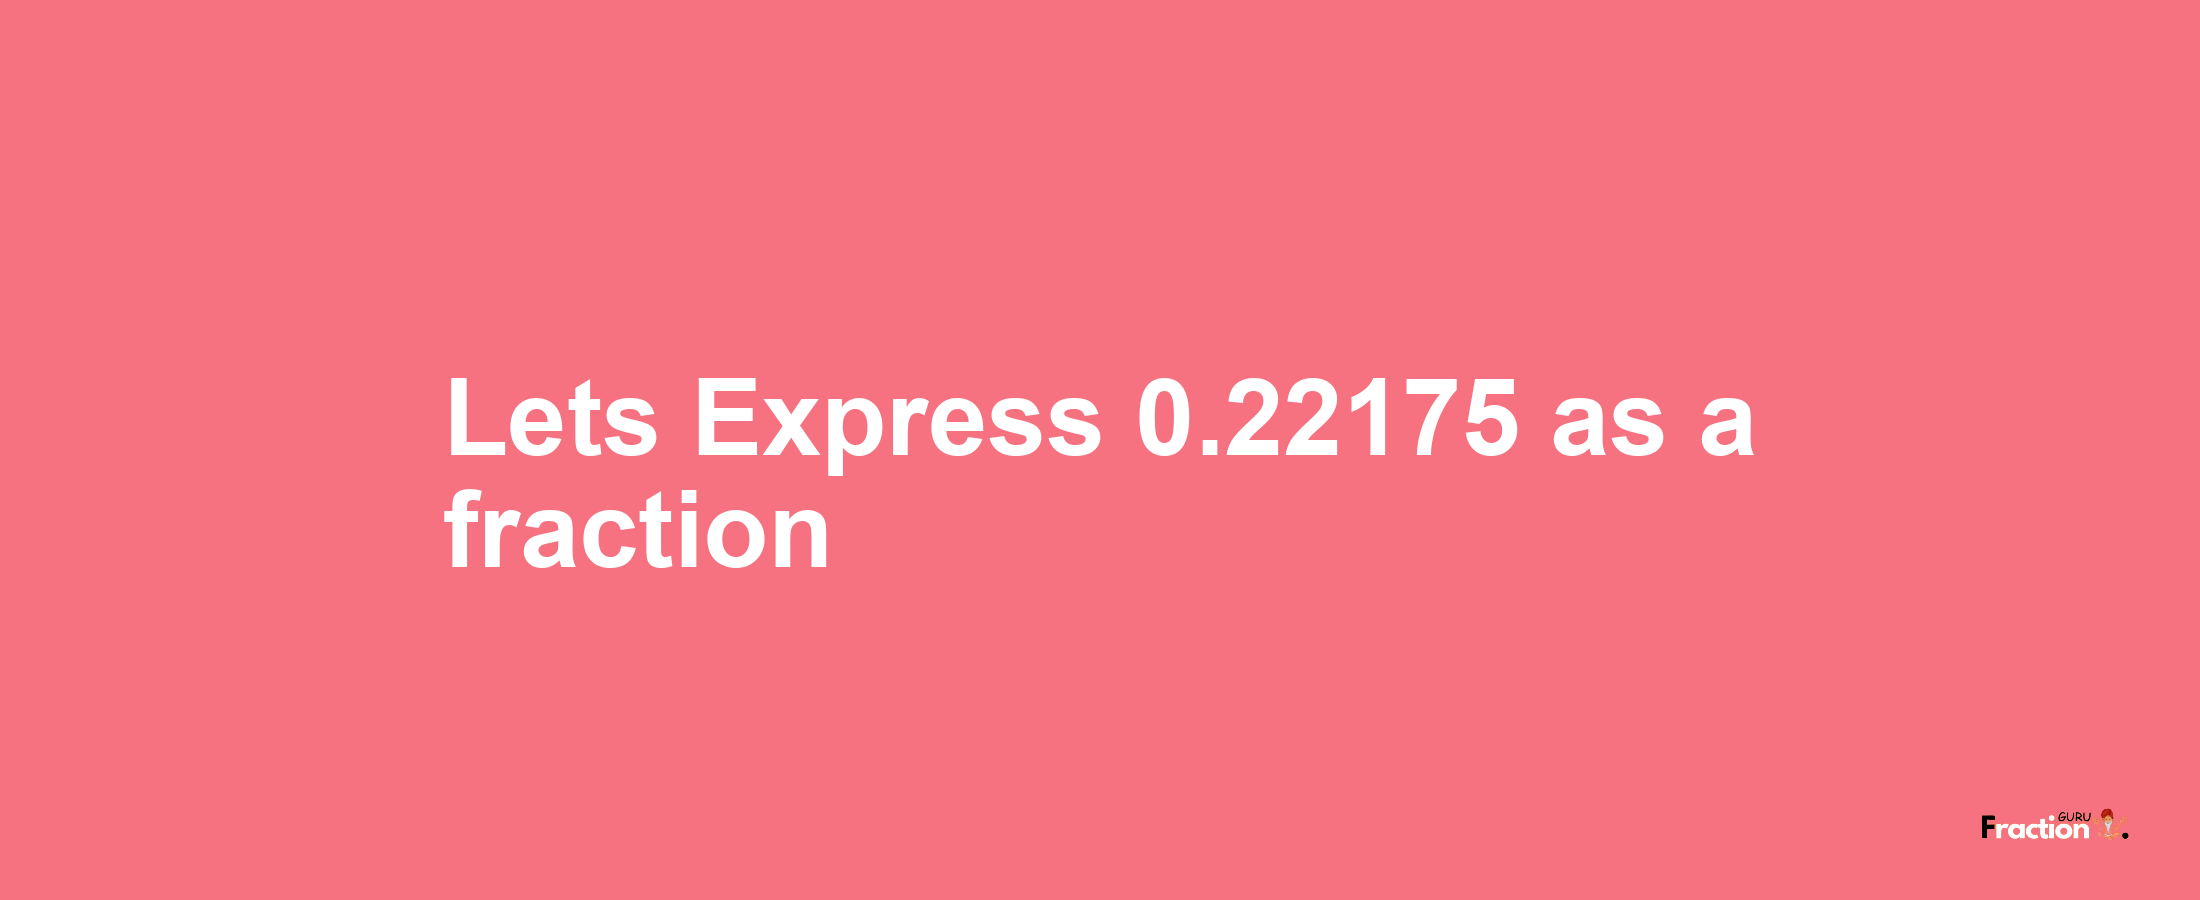 Lets Express 0.22175 as afraction